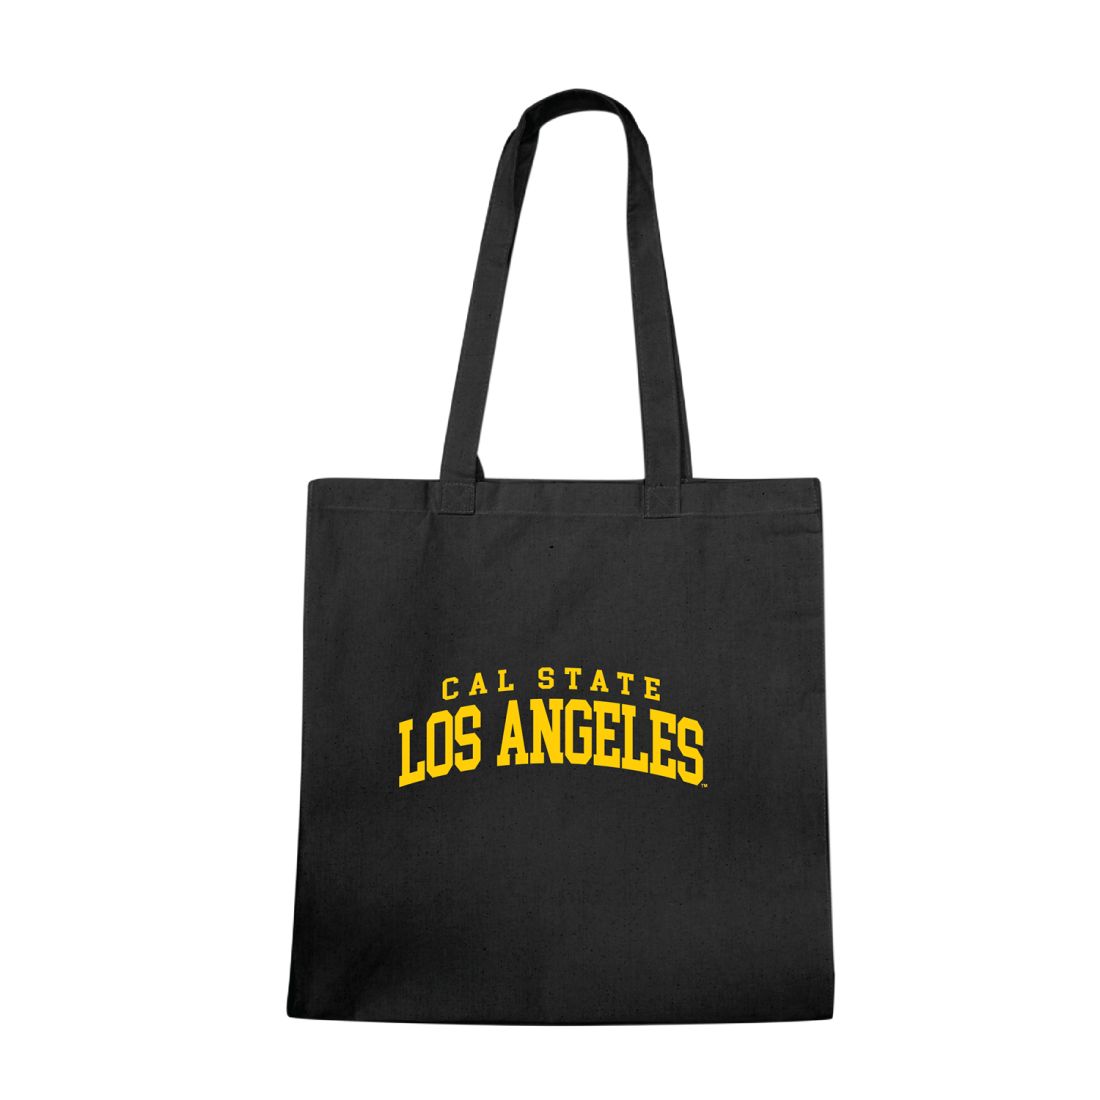 California State University Los Angeles Golden Eagles Institutional Seal Tote Bag